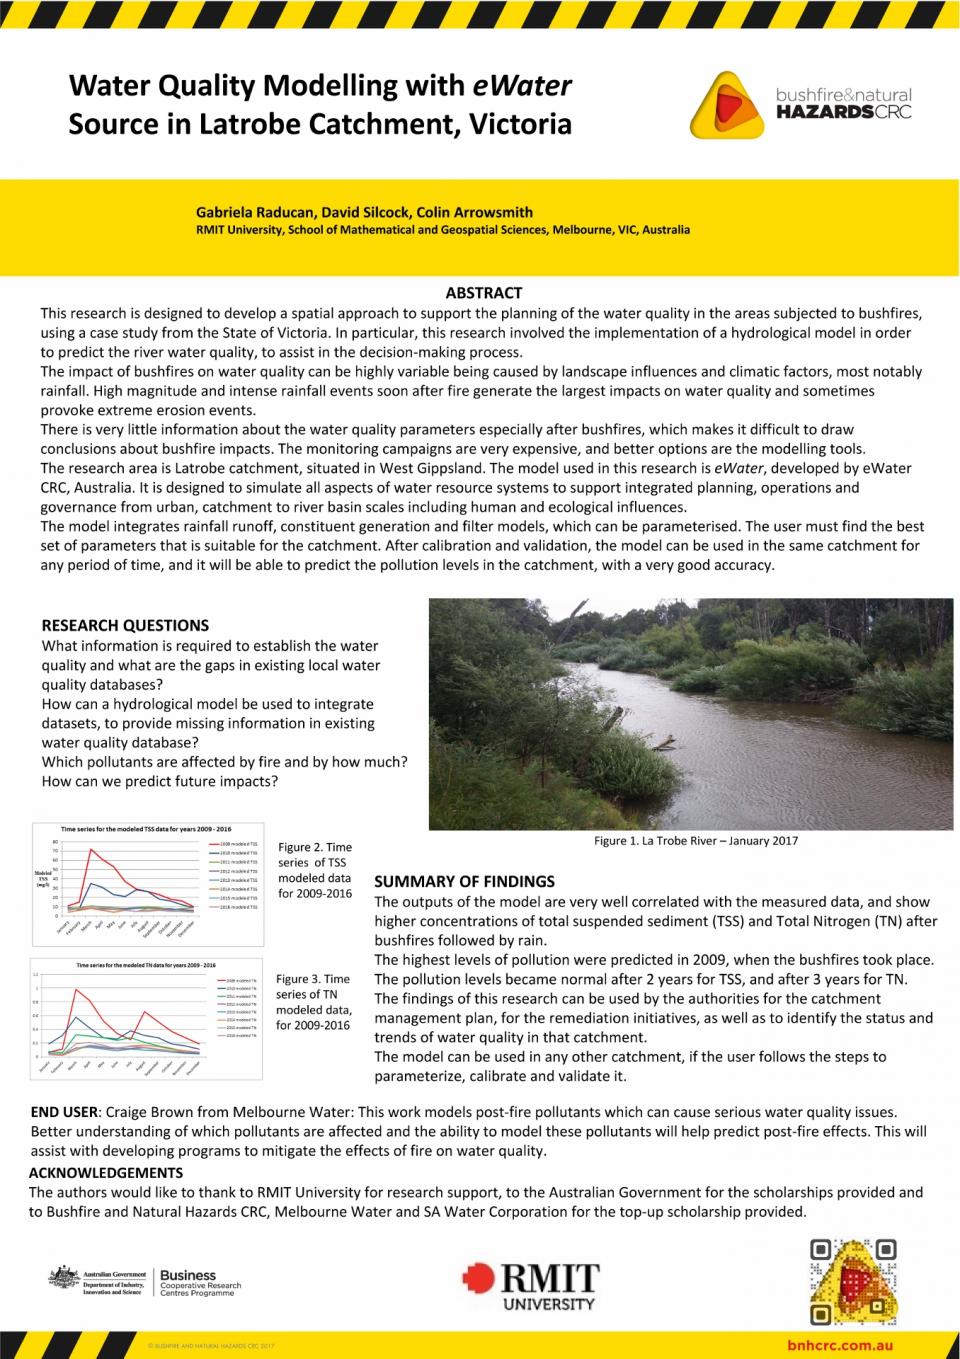 Water quality modelling with eWater source in Latrobe Catchment, Victoria